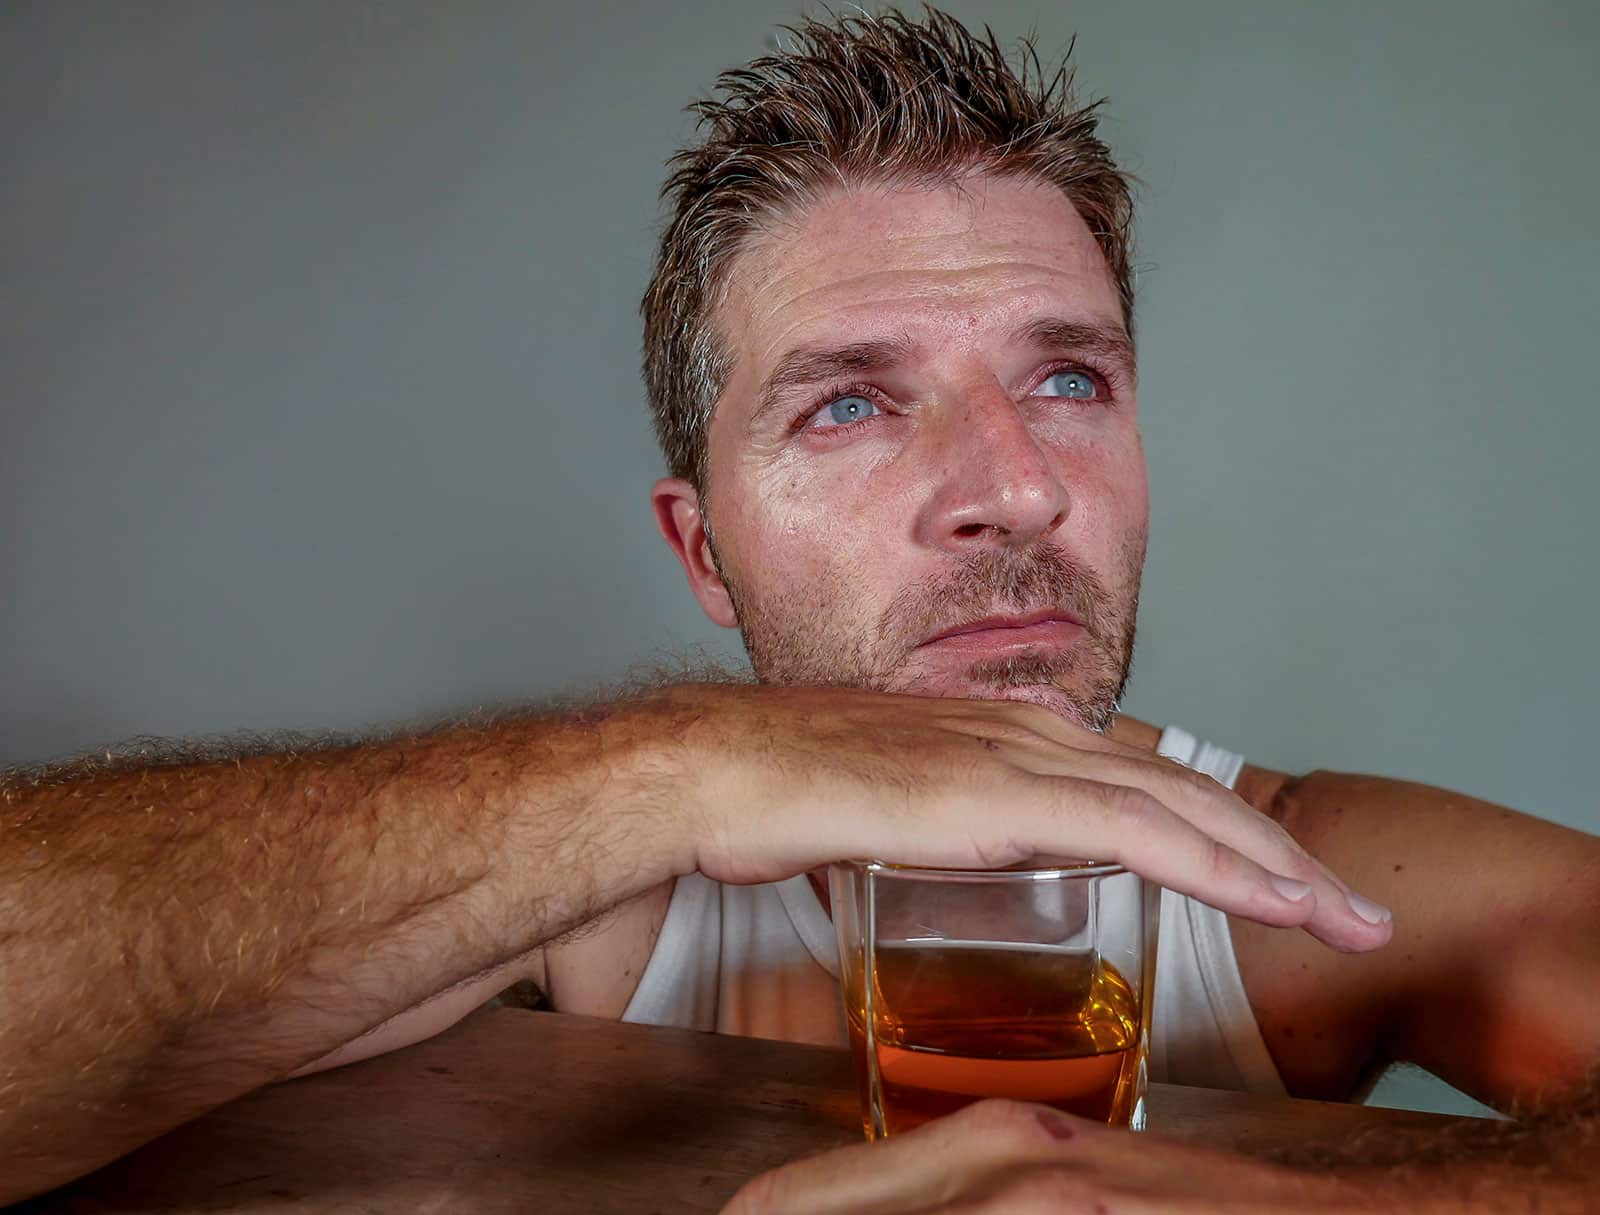 Alcoholic Eyes: Alcohol’s Effect on Vision and Perception